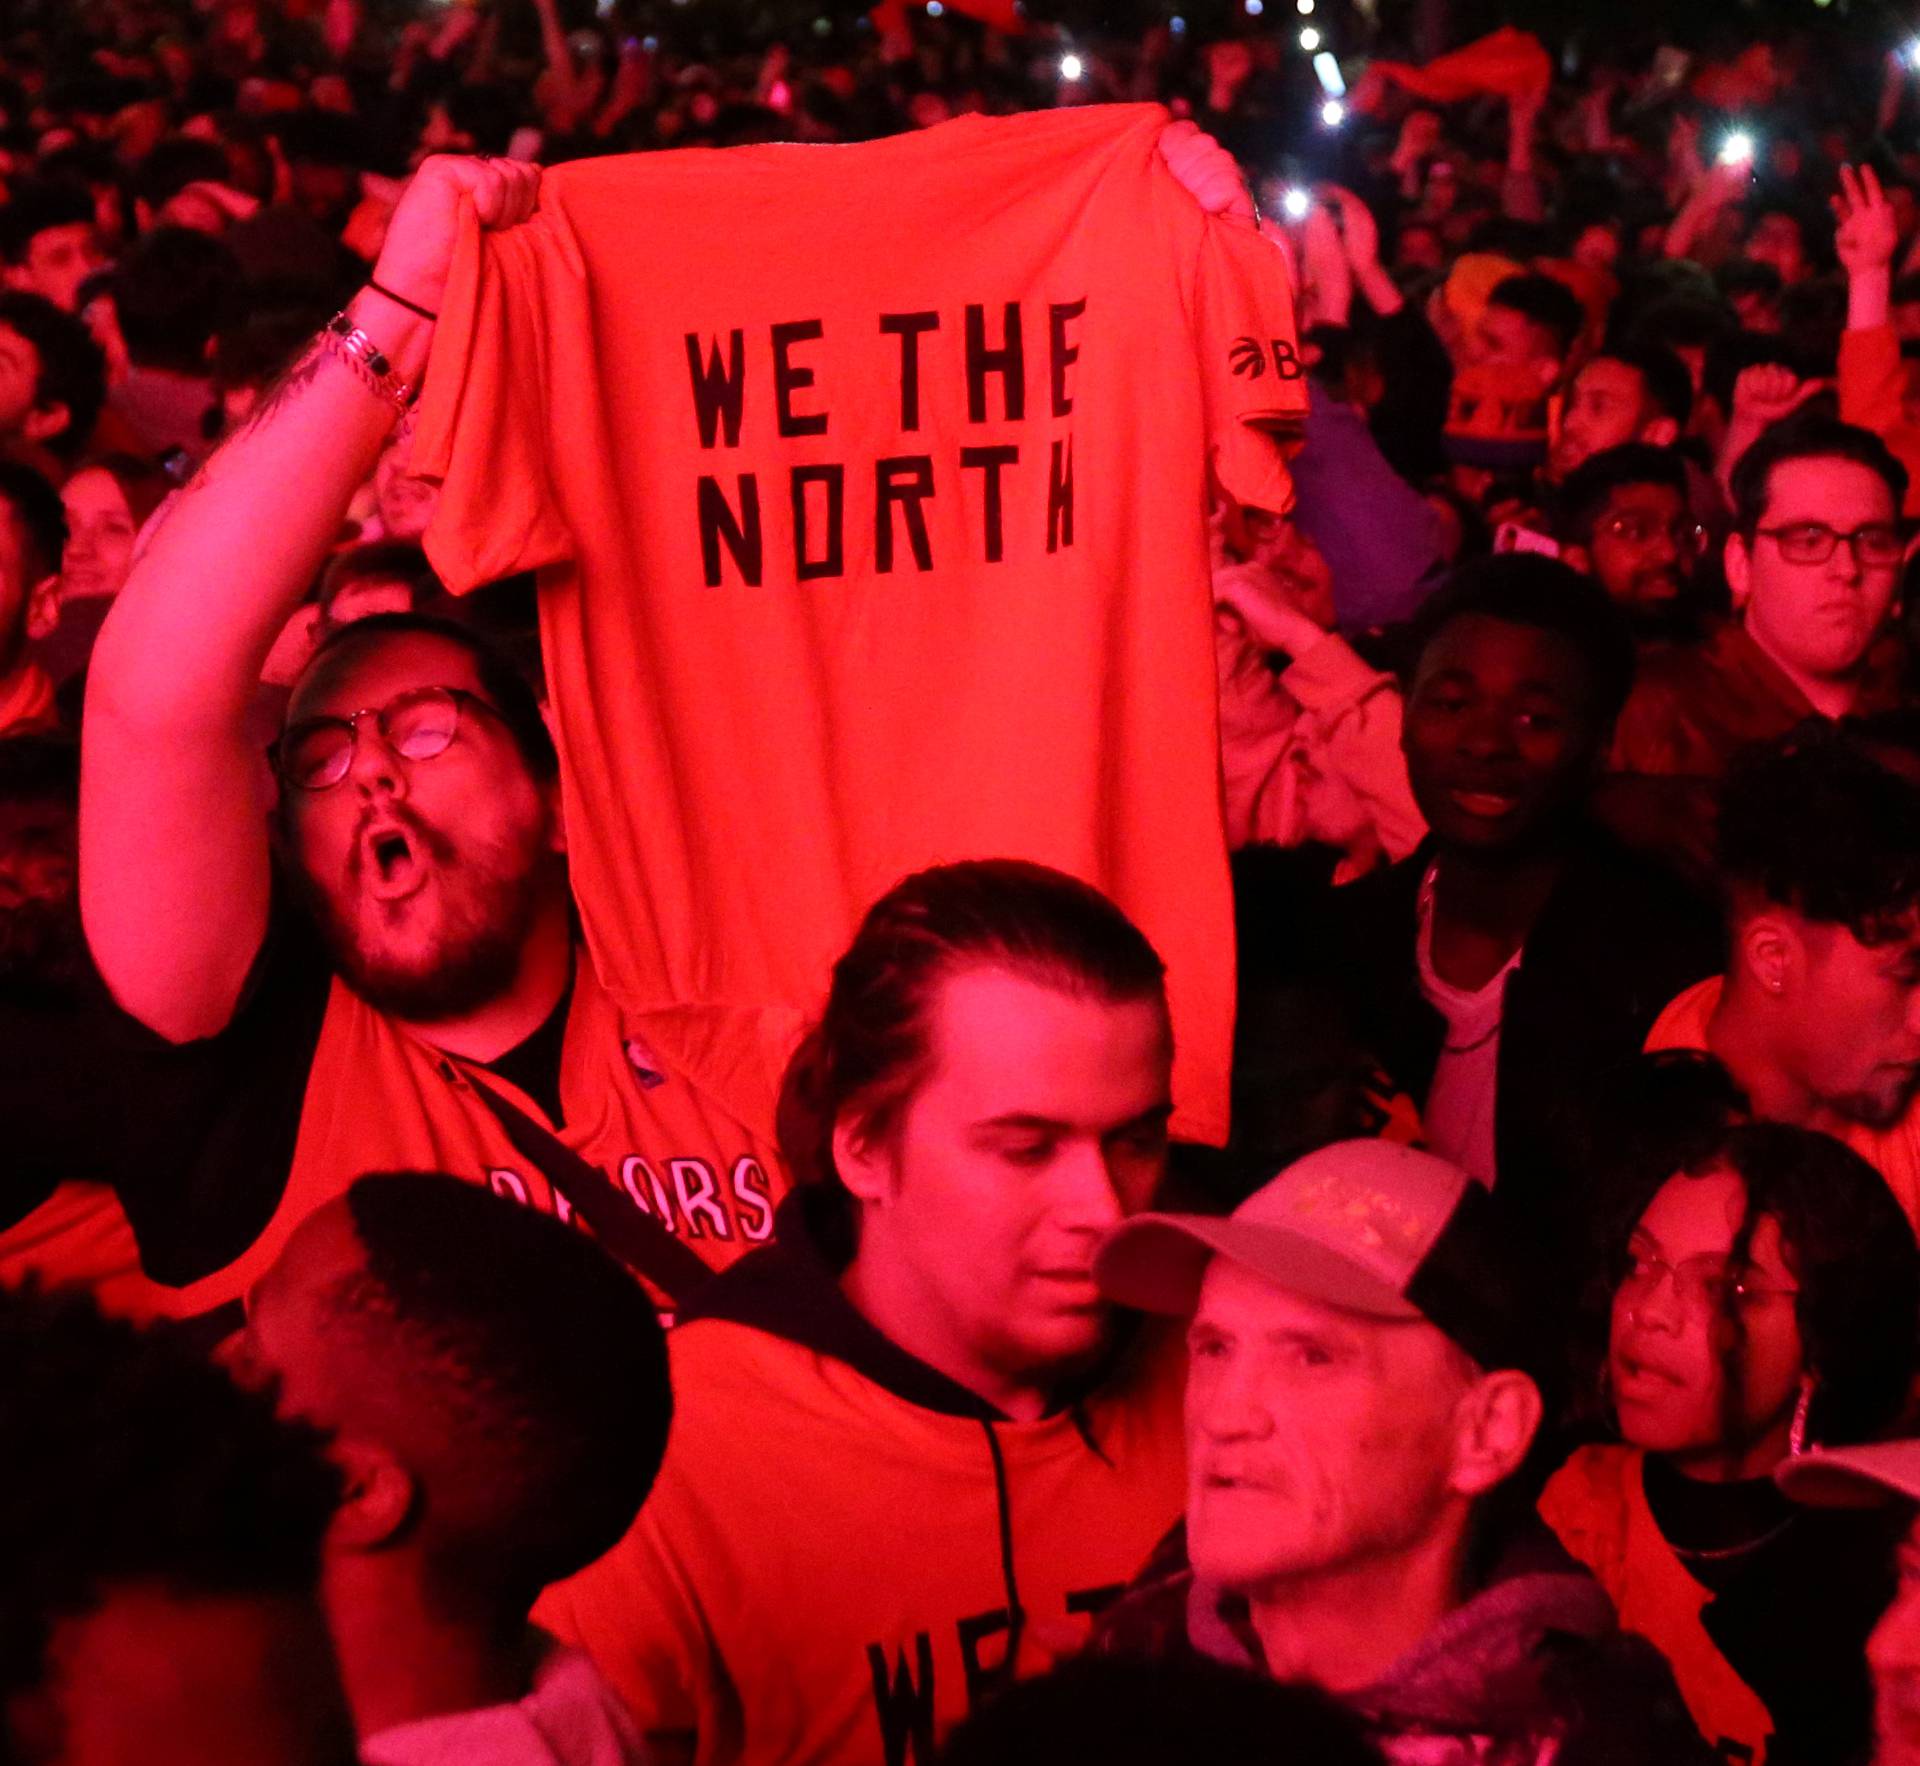 Fans celebrate their win in Game 6 of the NBA basketball Finals between the Toronto Raptors and the Golden State Warriors on a large screen in a fan zone in Montreal